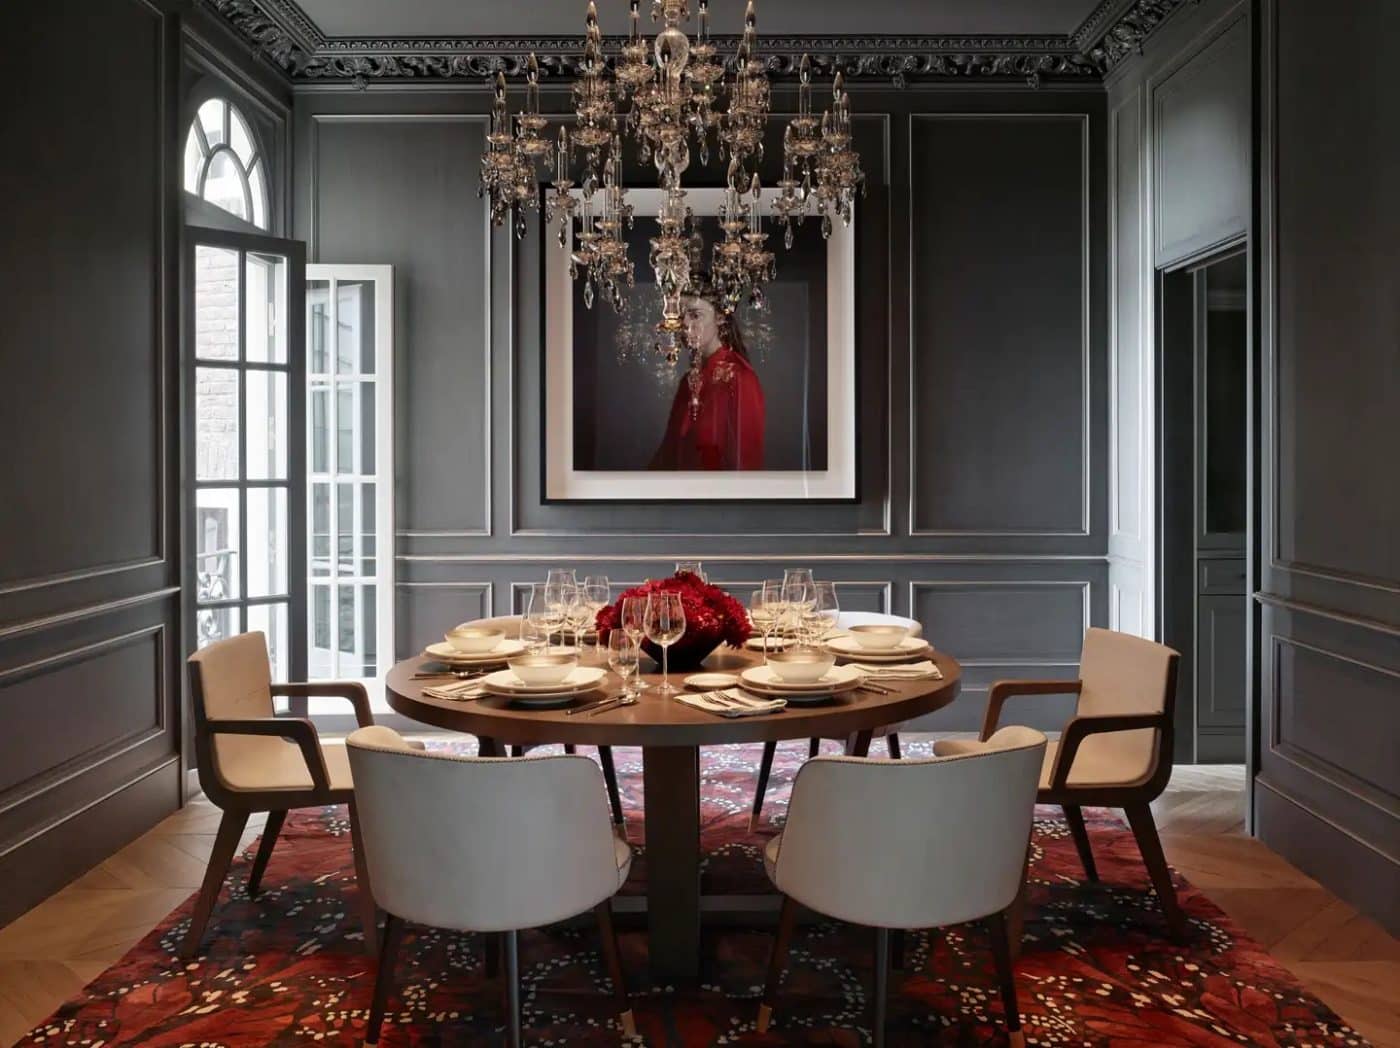 A a dove-gray San Francisco dining room by JKA design with a German crystal chandelier, a portrait of a figure wearing red by British photographer Richard Learoyd, a B&B Italia table, B&B Italia chairs and a red monarch-butterfly-patterned carpet by Alexander McQueen for The Rug Company